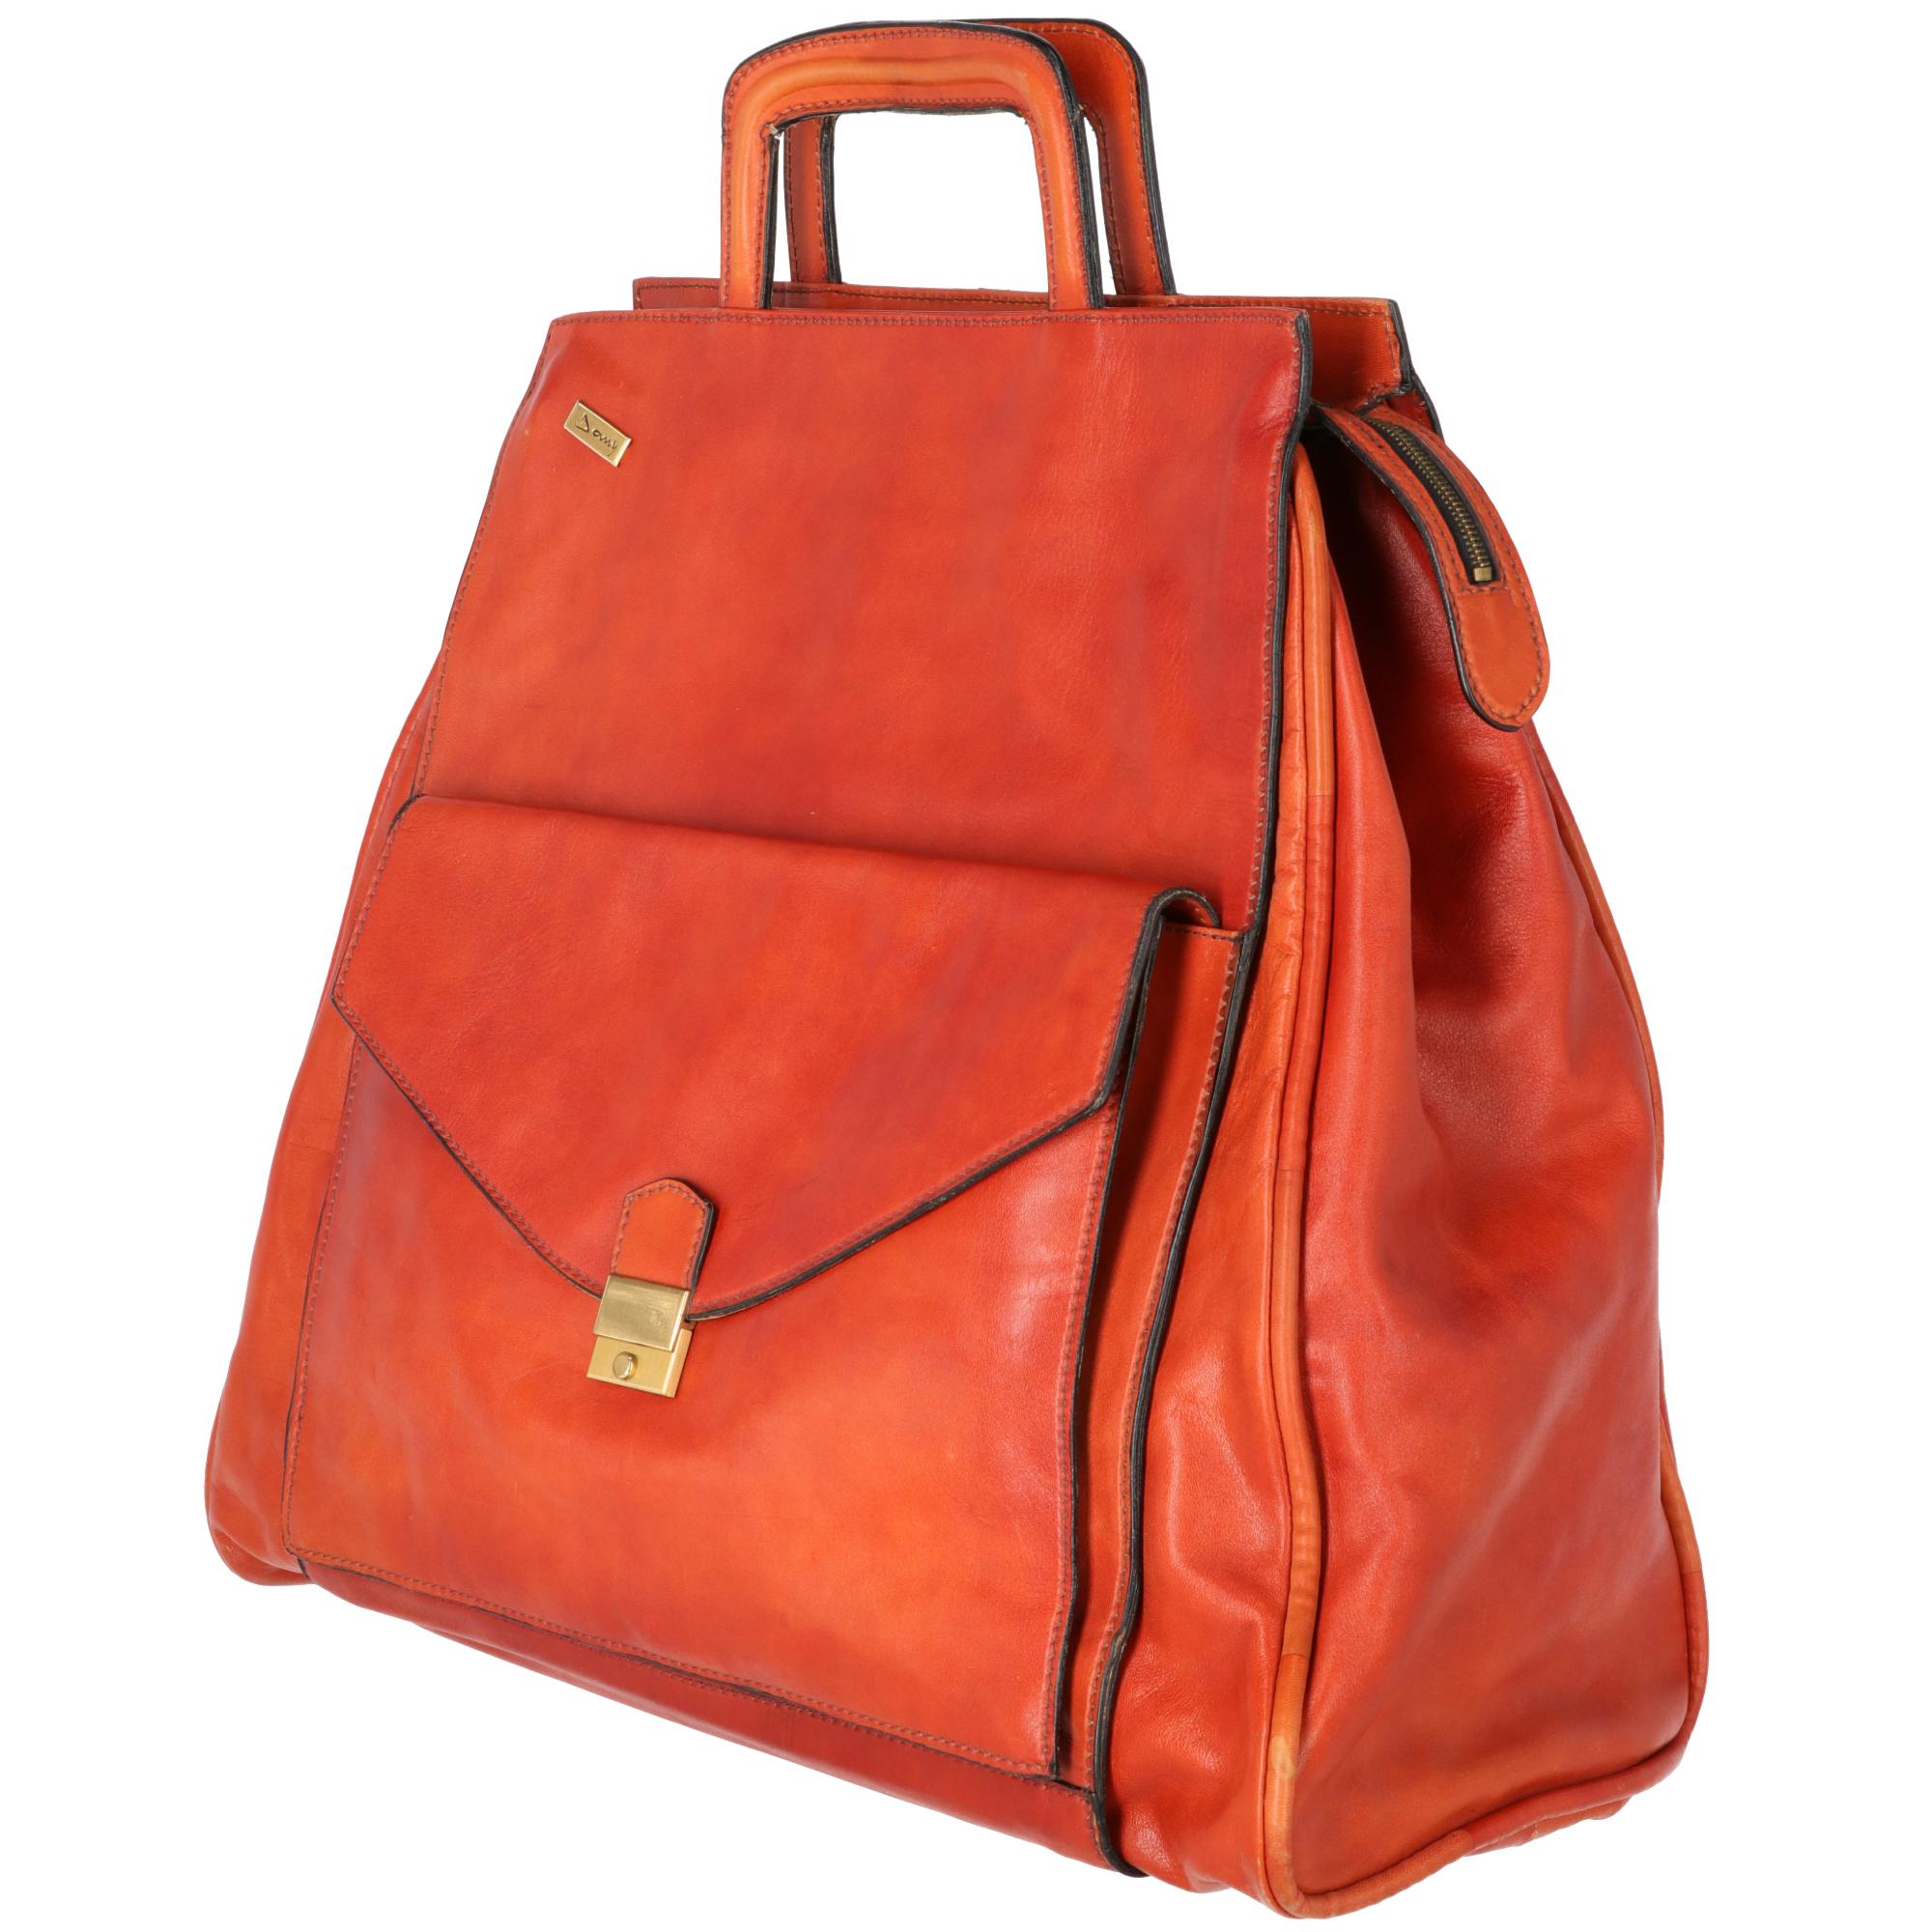 Damy travel bag made of orange leather, with zip closure, two rigid handles, has a pocket with flap and snap closure in golden metal, small front plate in logoed metal. The lining is in military green cotton velvet, has two internal pockets, one